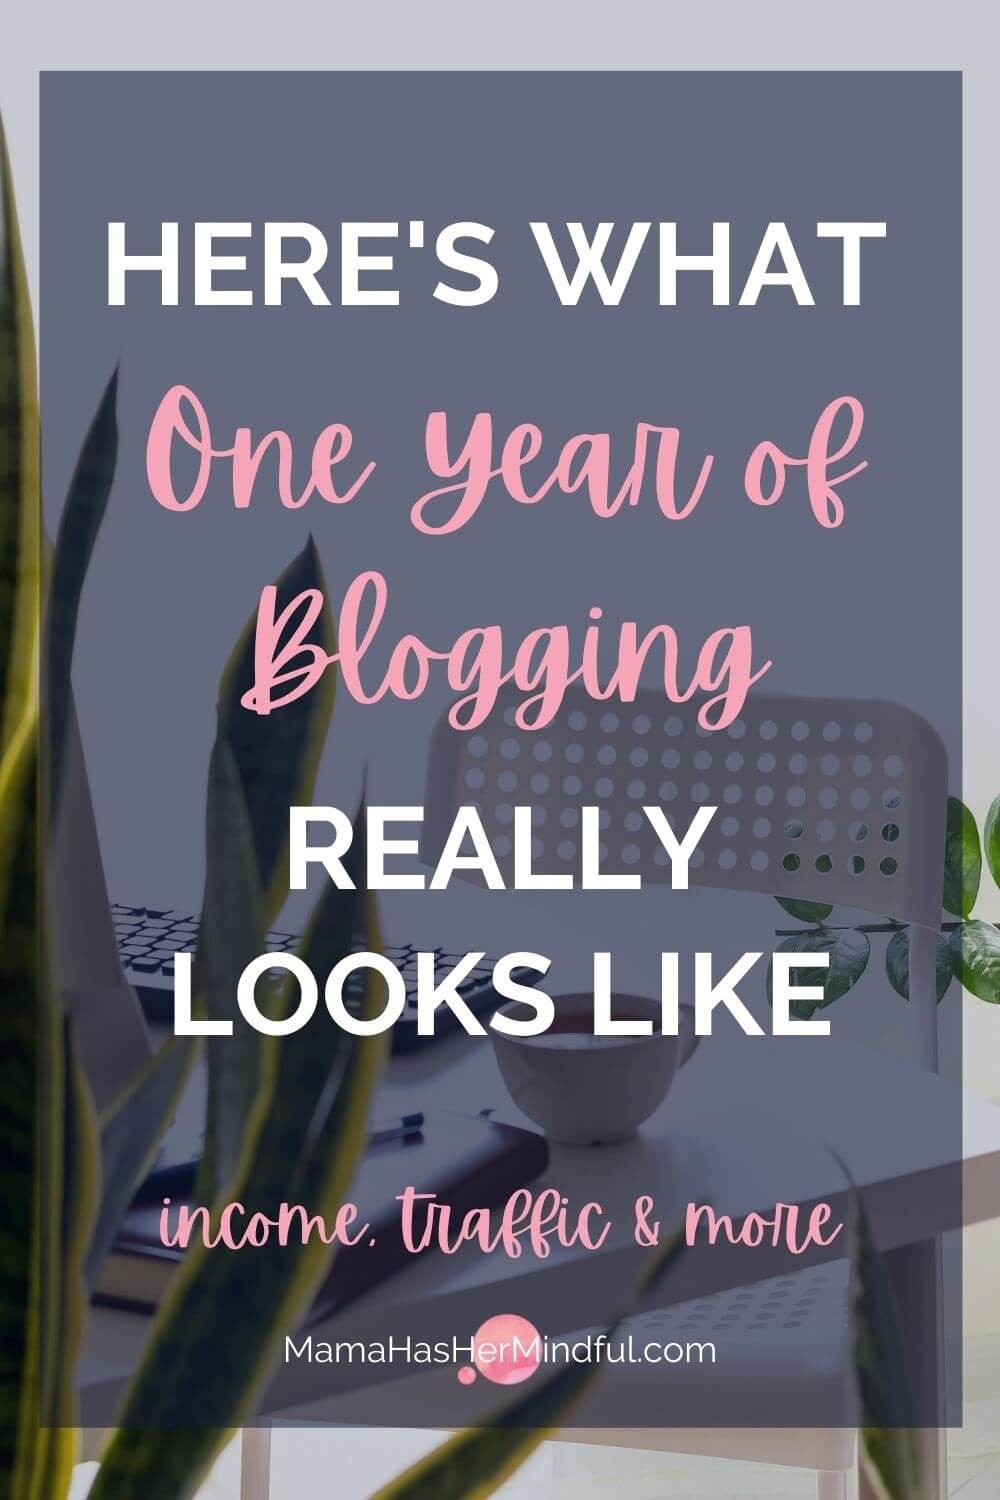 My First Year Mom Blogging: Income, Traffic & More Revealed